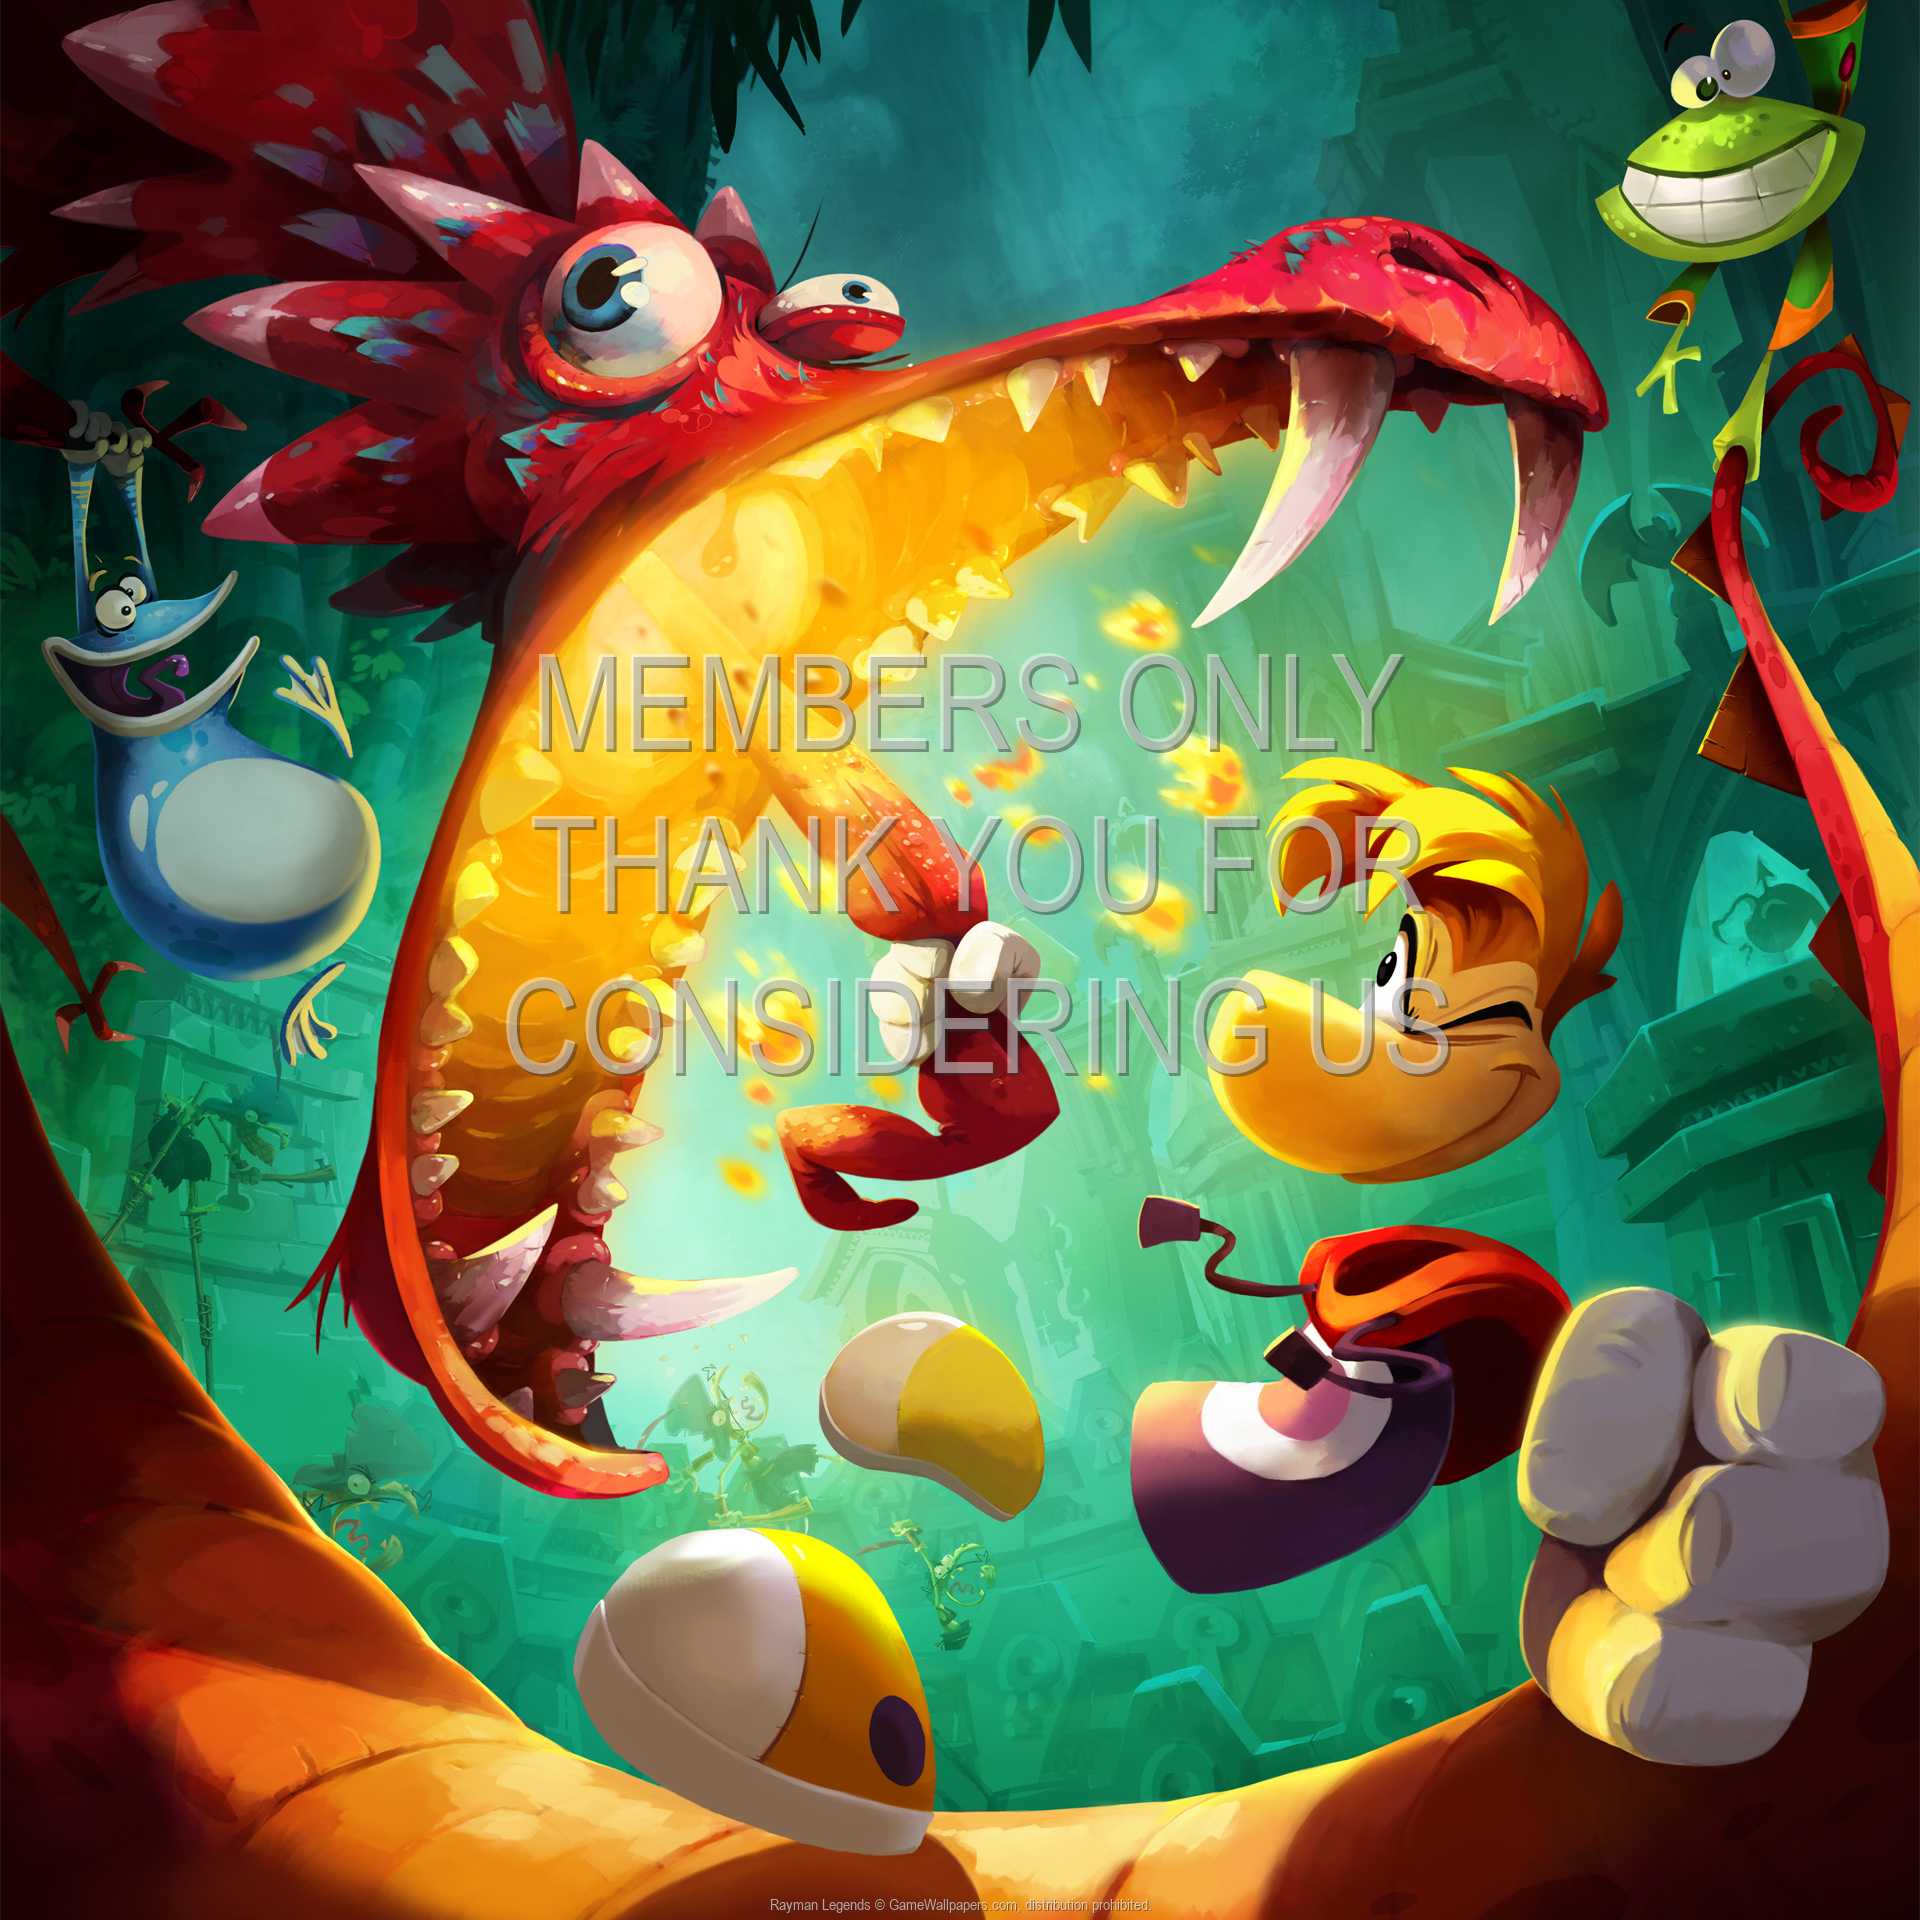 Rayman Legends 1080p%20Horizontal Mobile wallpaper or background 03